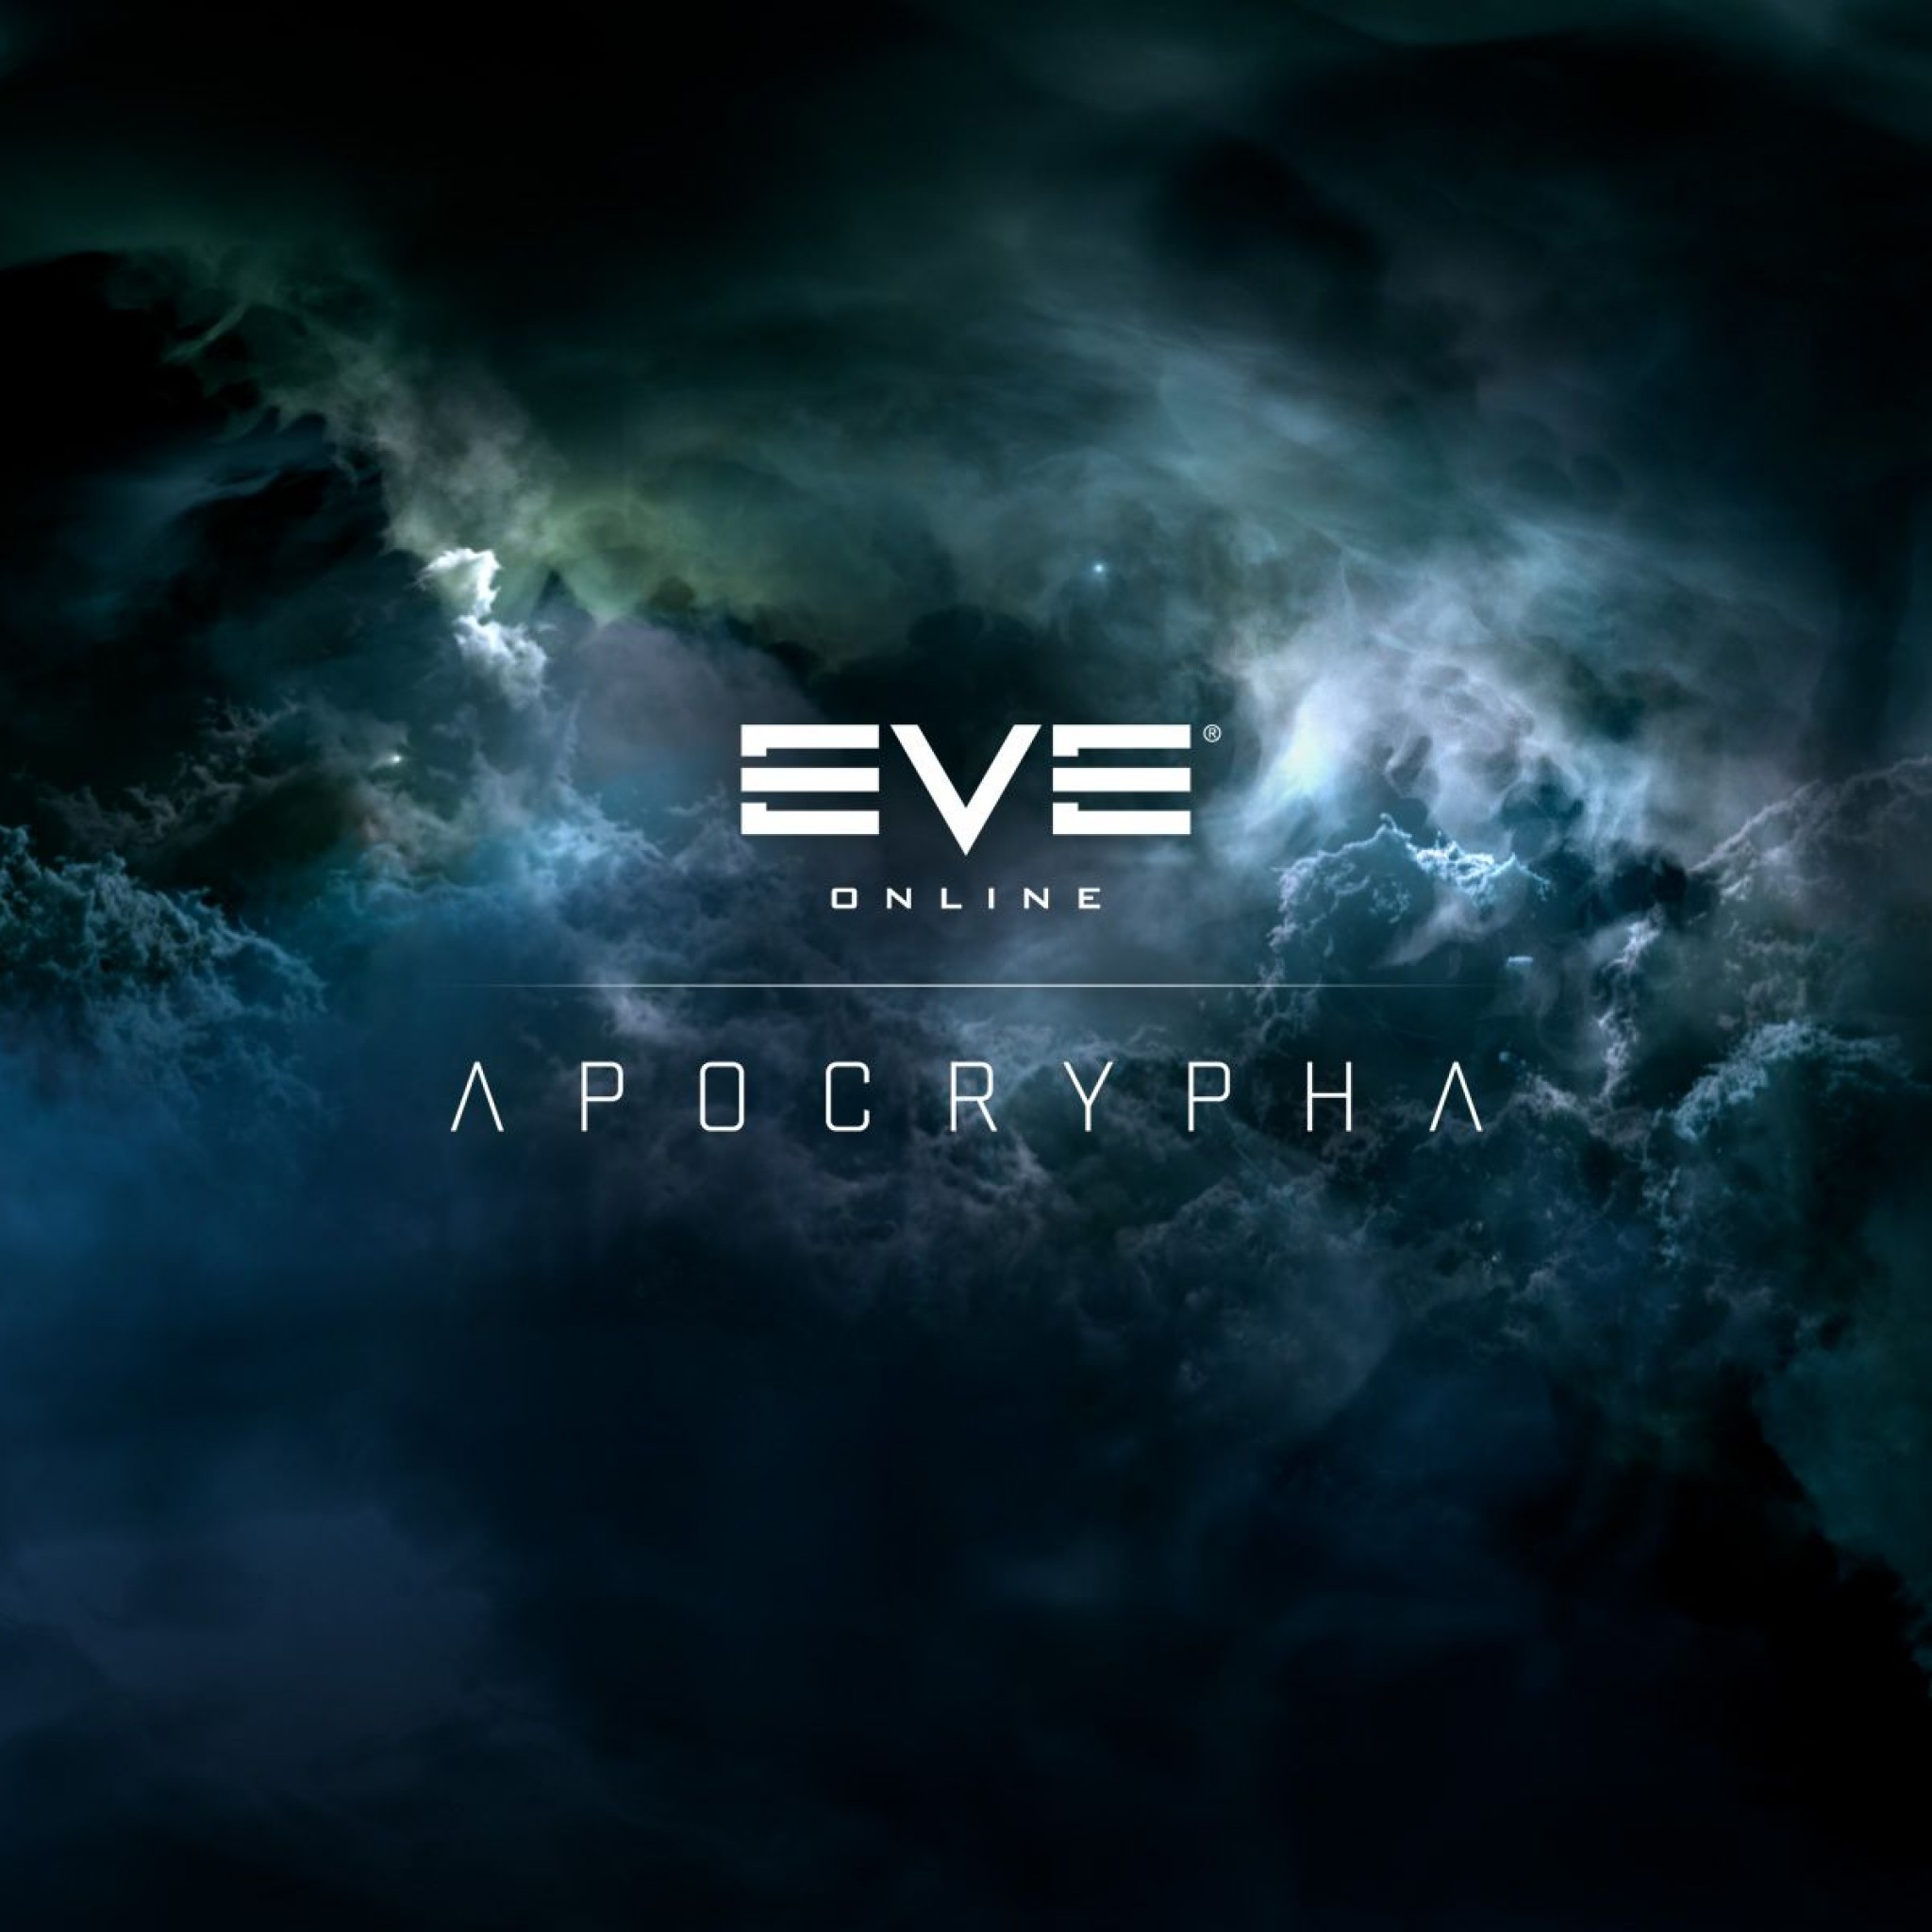 Eve Online Apocrypha Wallpaper Wallpapers Pic Ipad タブレット壁紙ギャラリー